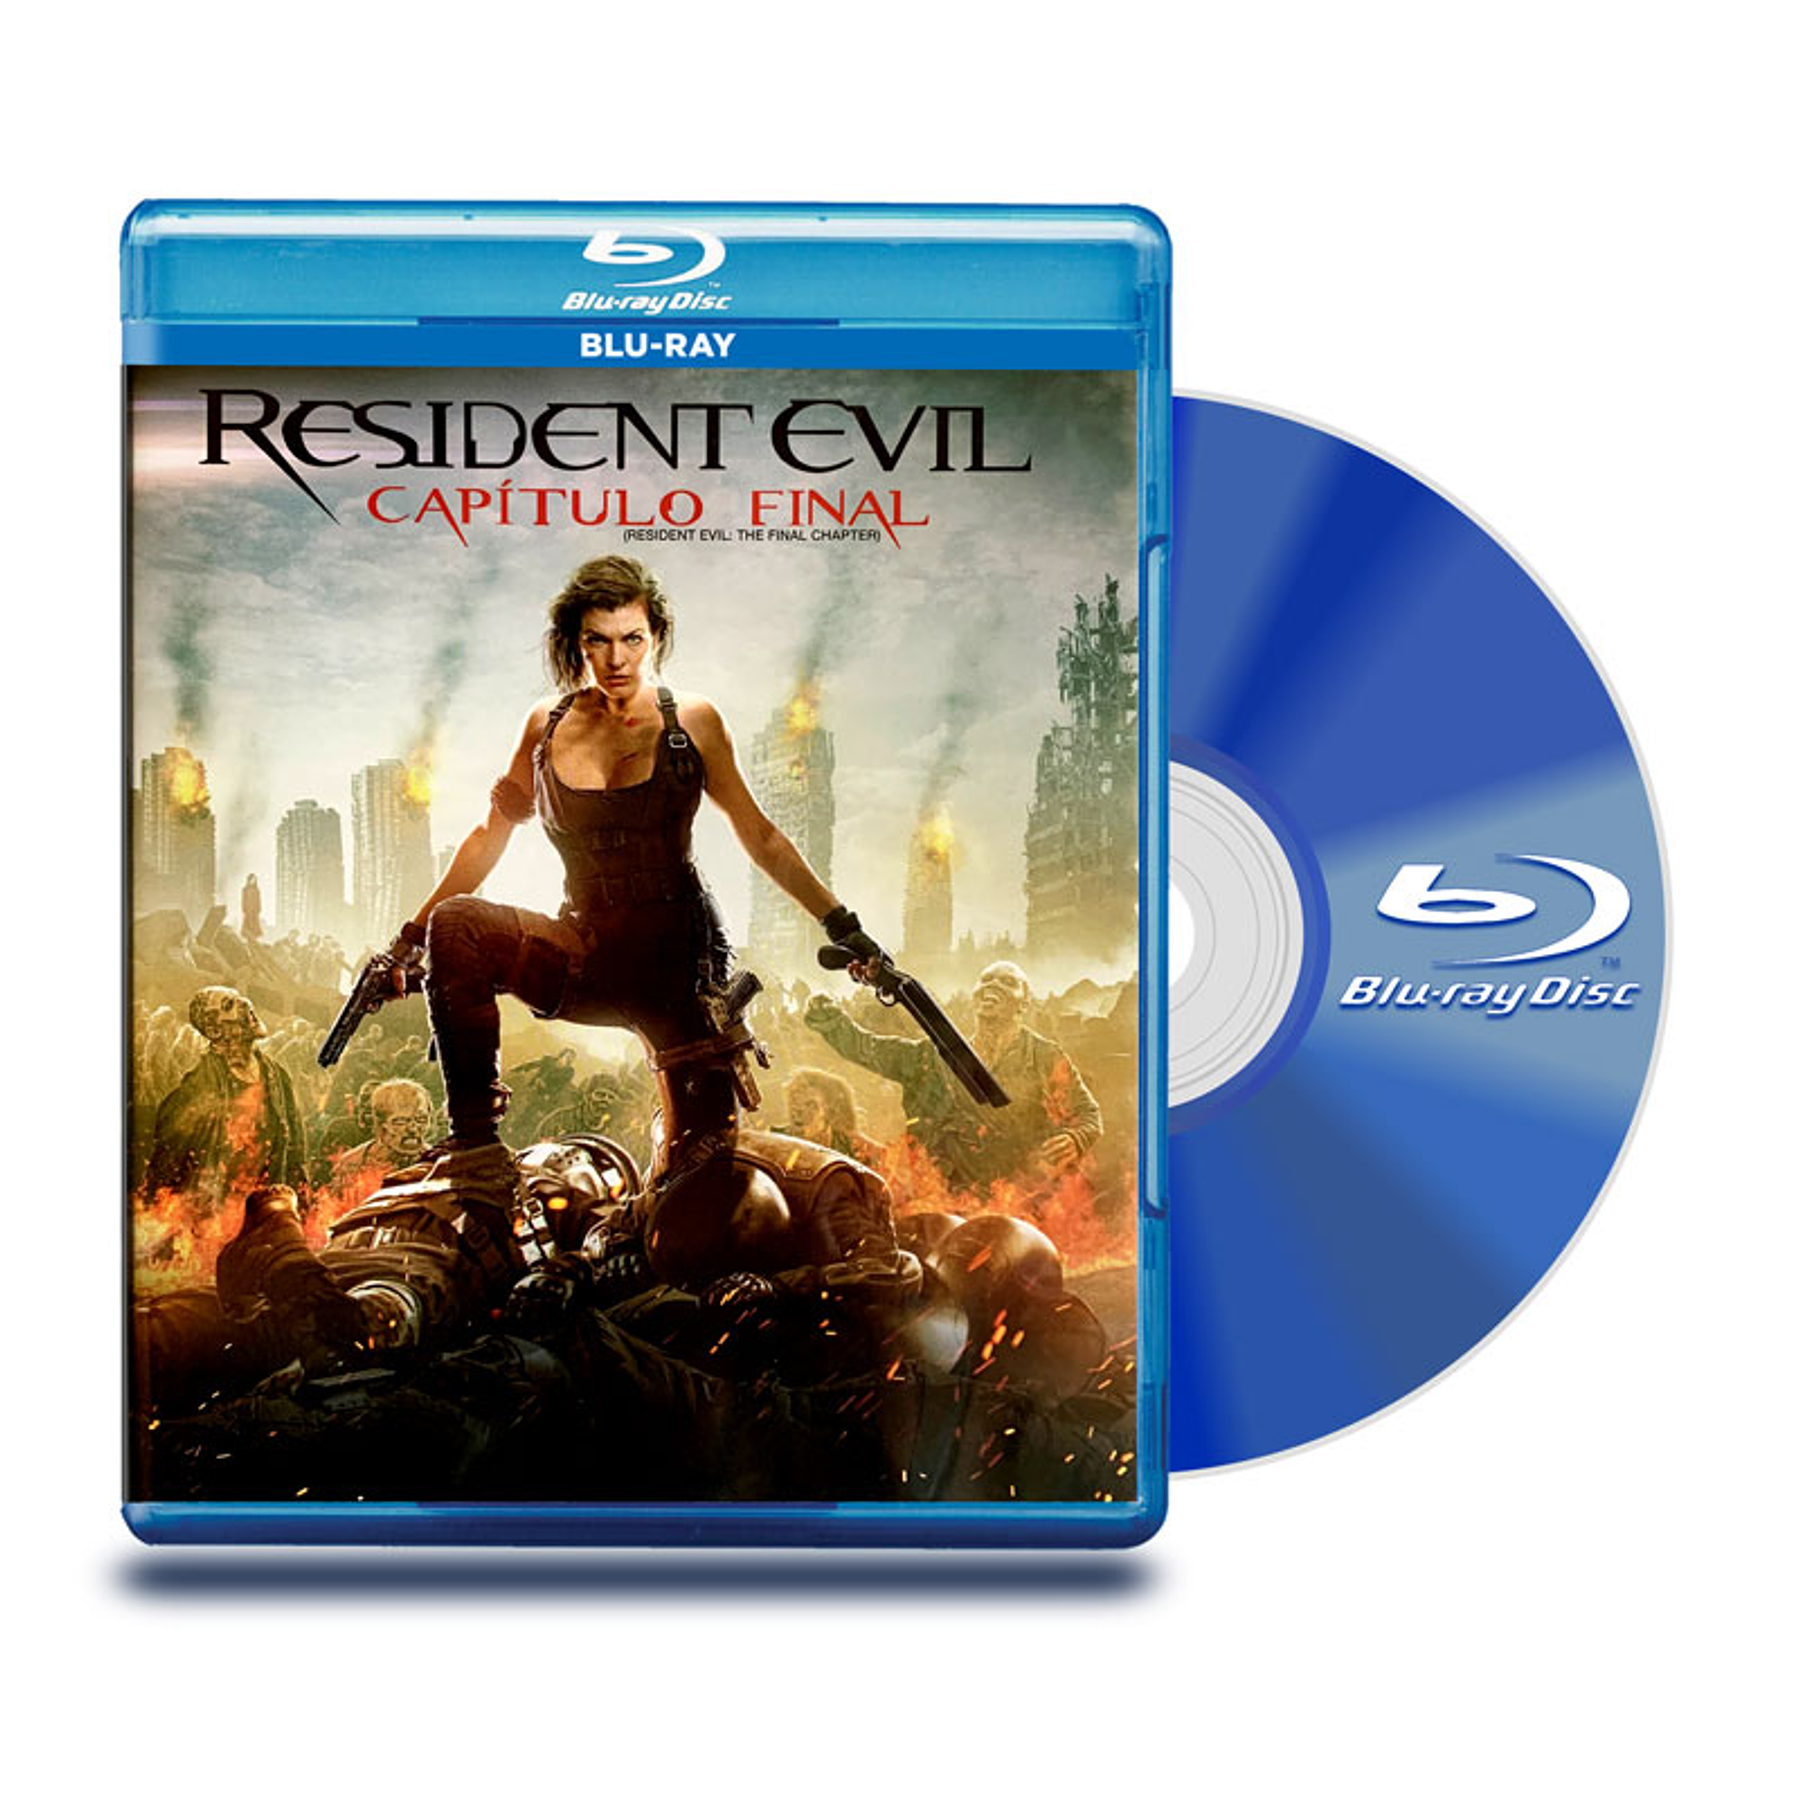 BLU RAY RESIDENT EVIL: CAPITULO FINAL